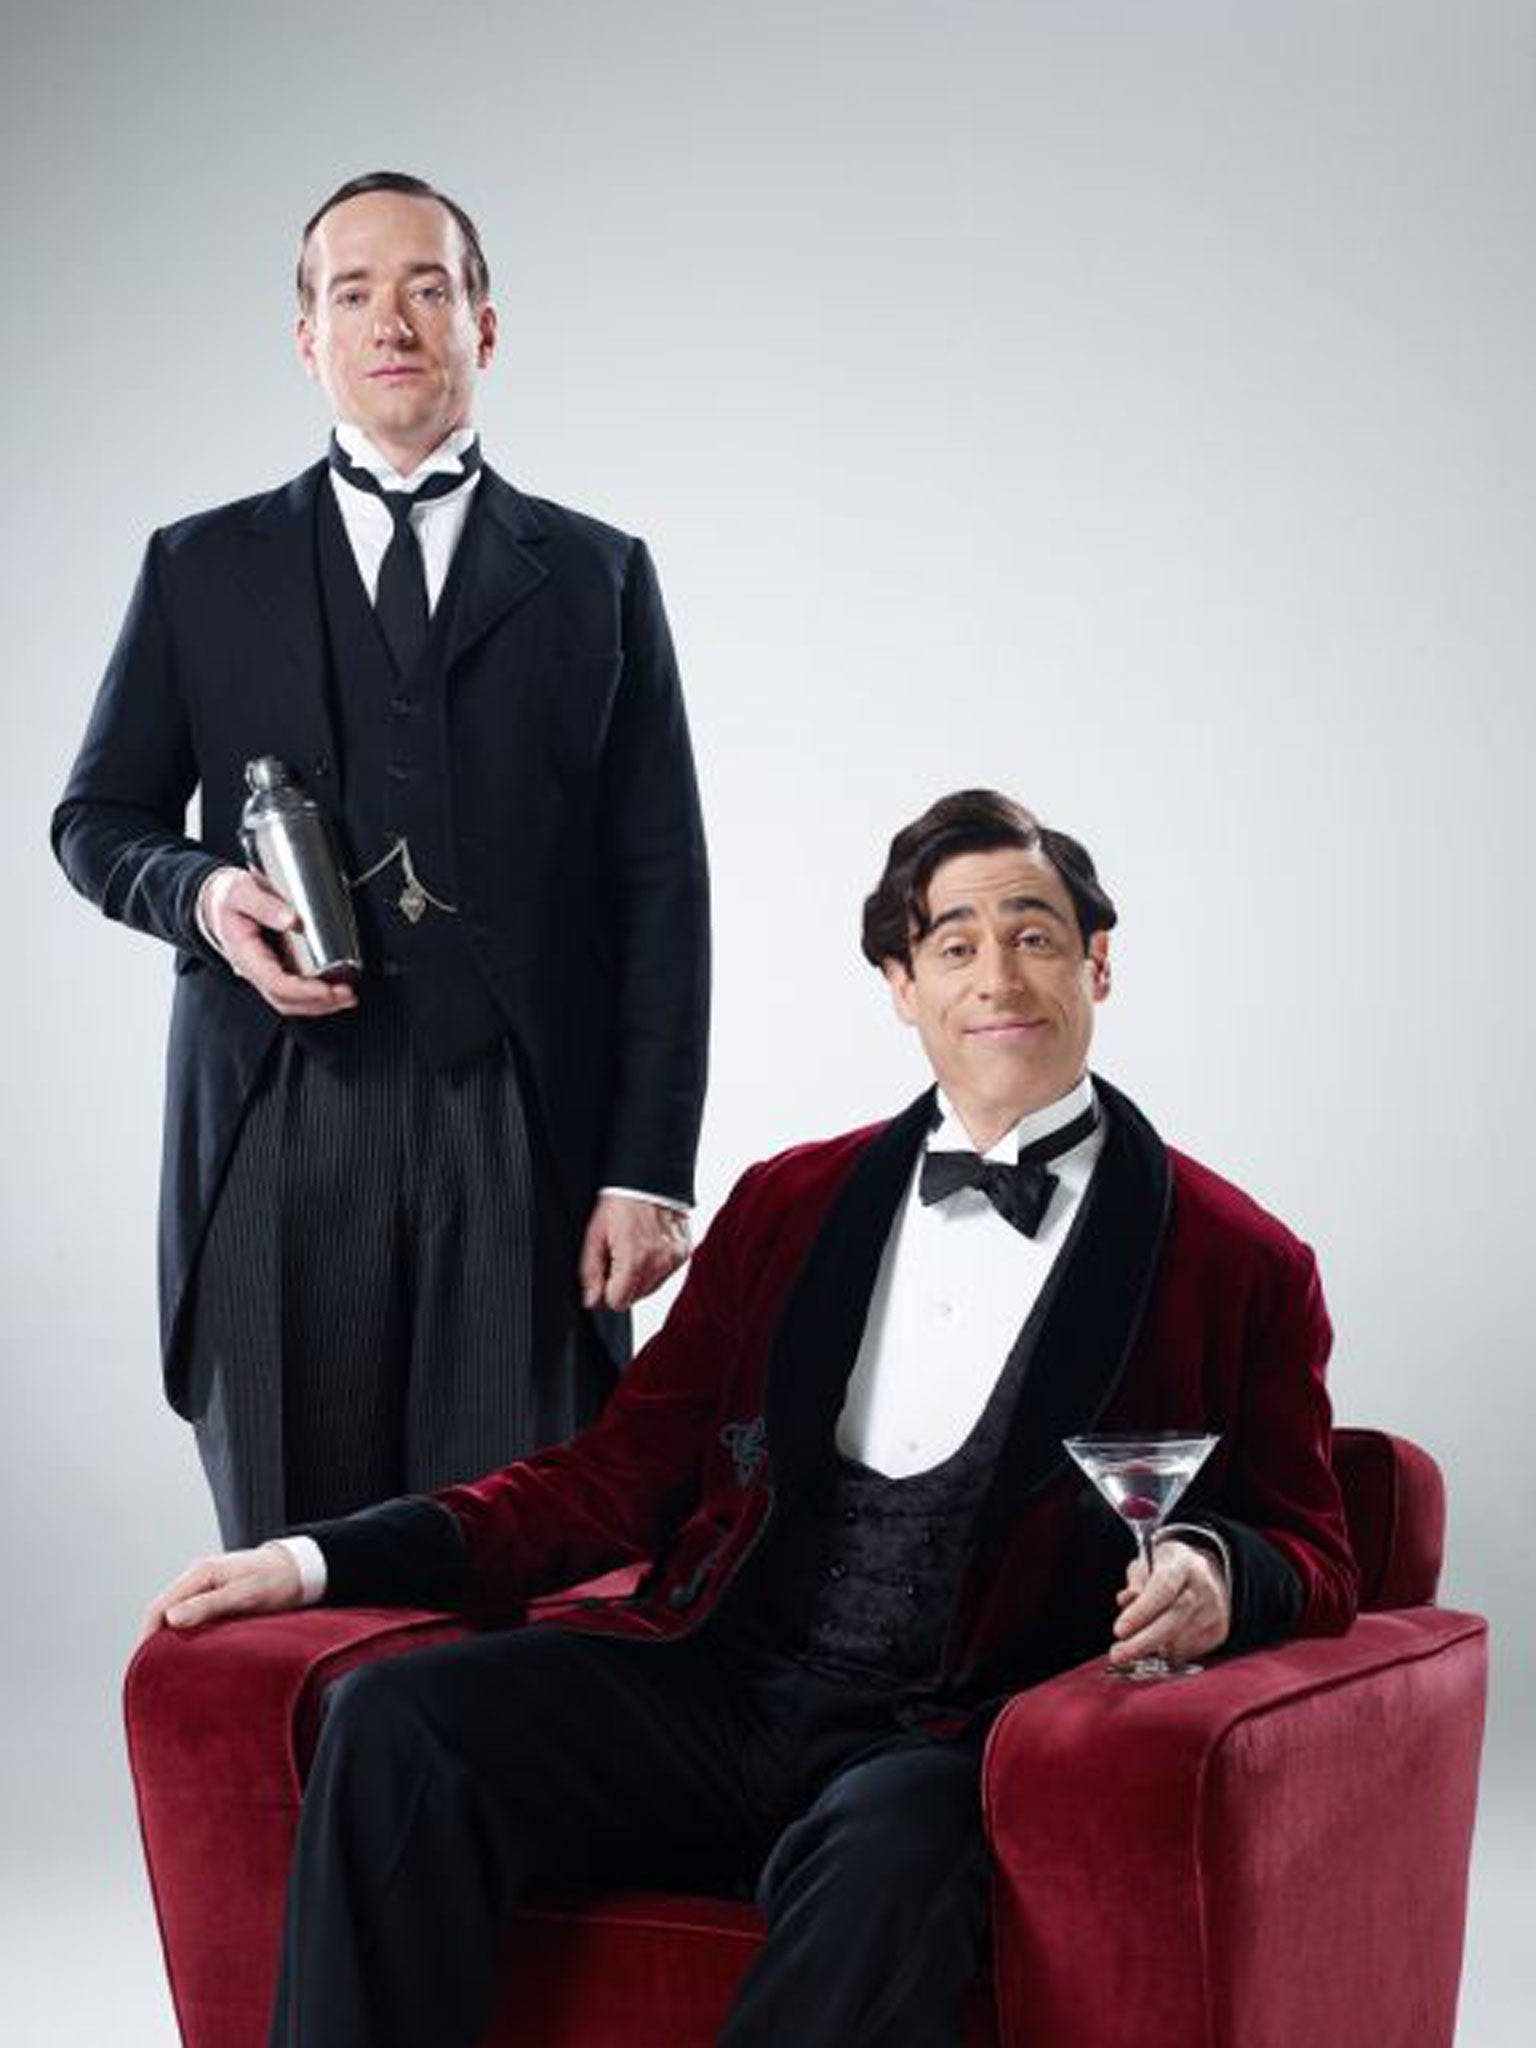 Stephen Mangan, right, and Matthew Macfadyen, left, as Wooster and Jeeves